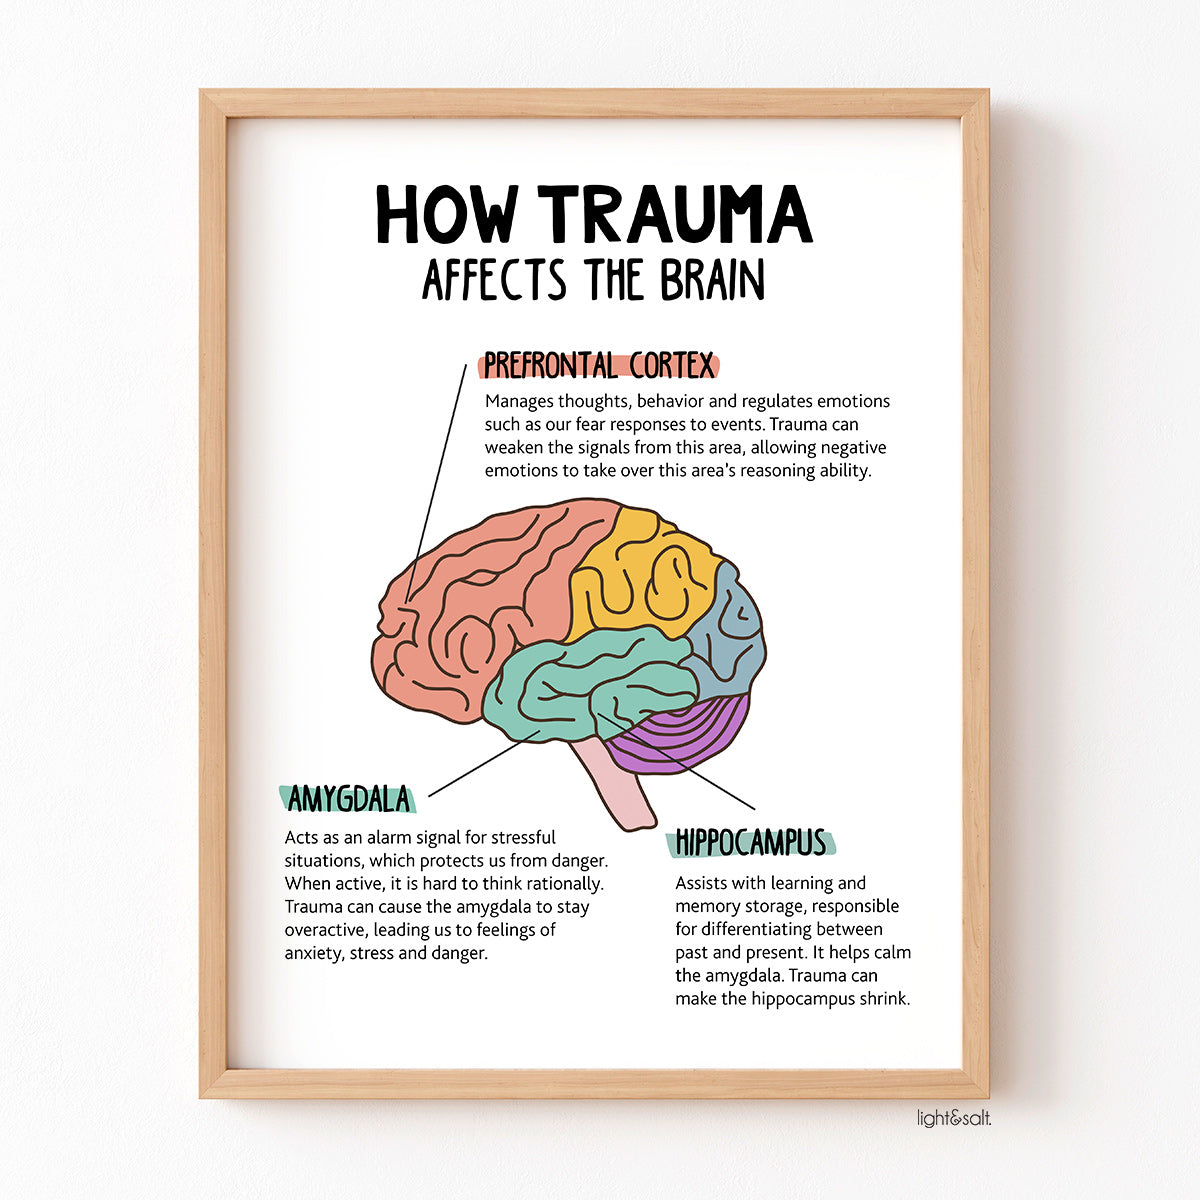 How trauma affects the brain poster